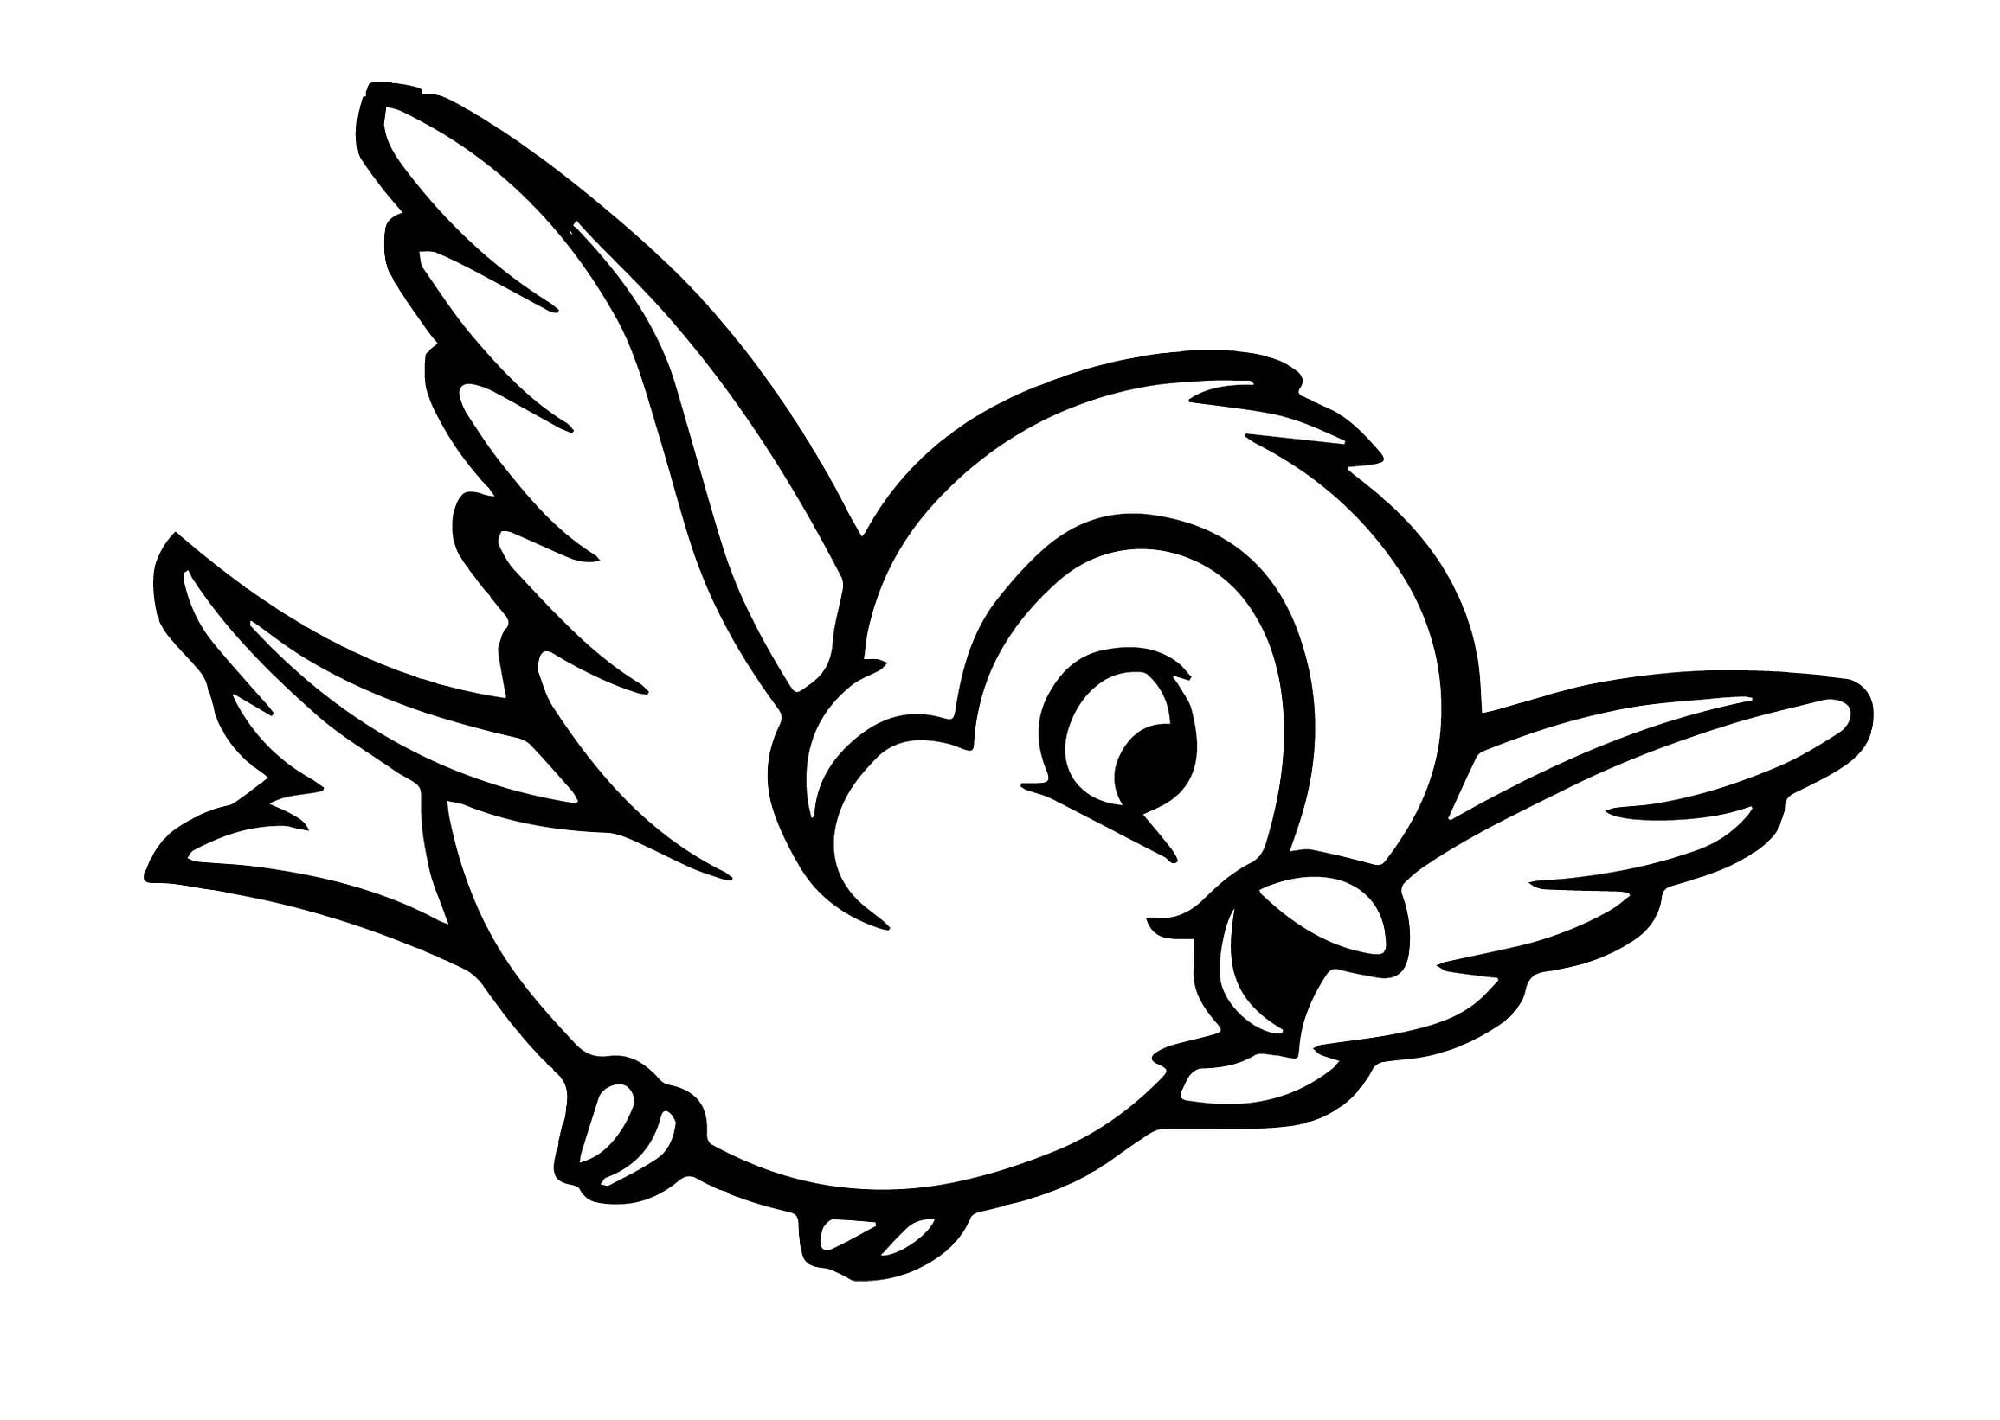 18 Printable Bird Coloring Pages: Print and Color PDF - Print Color Craft